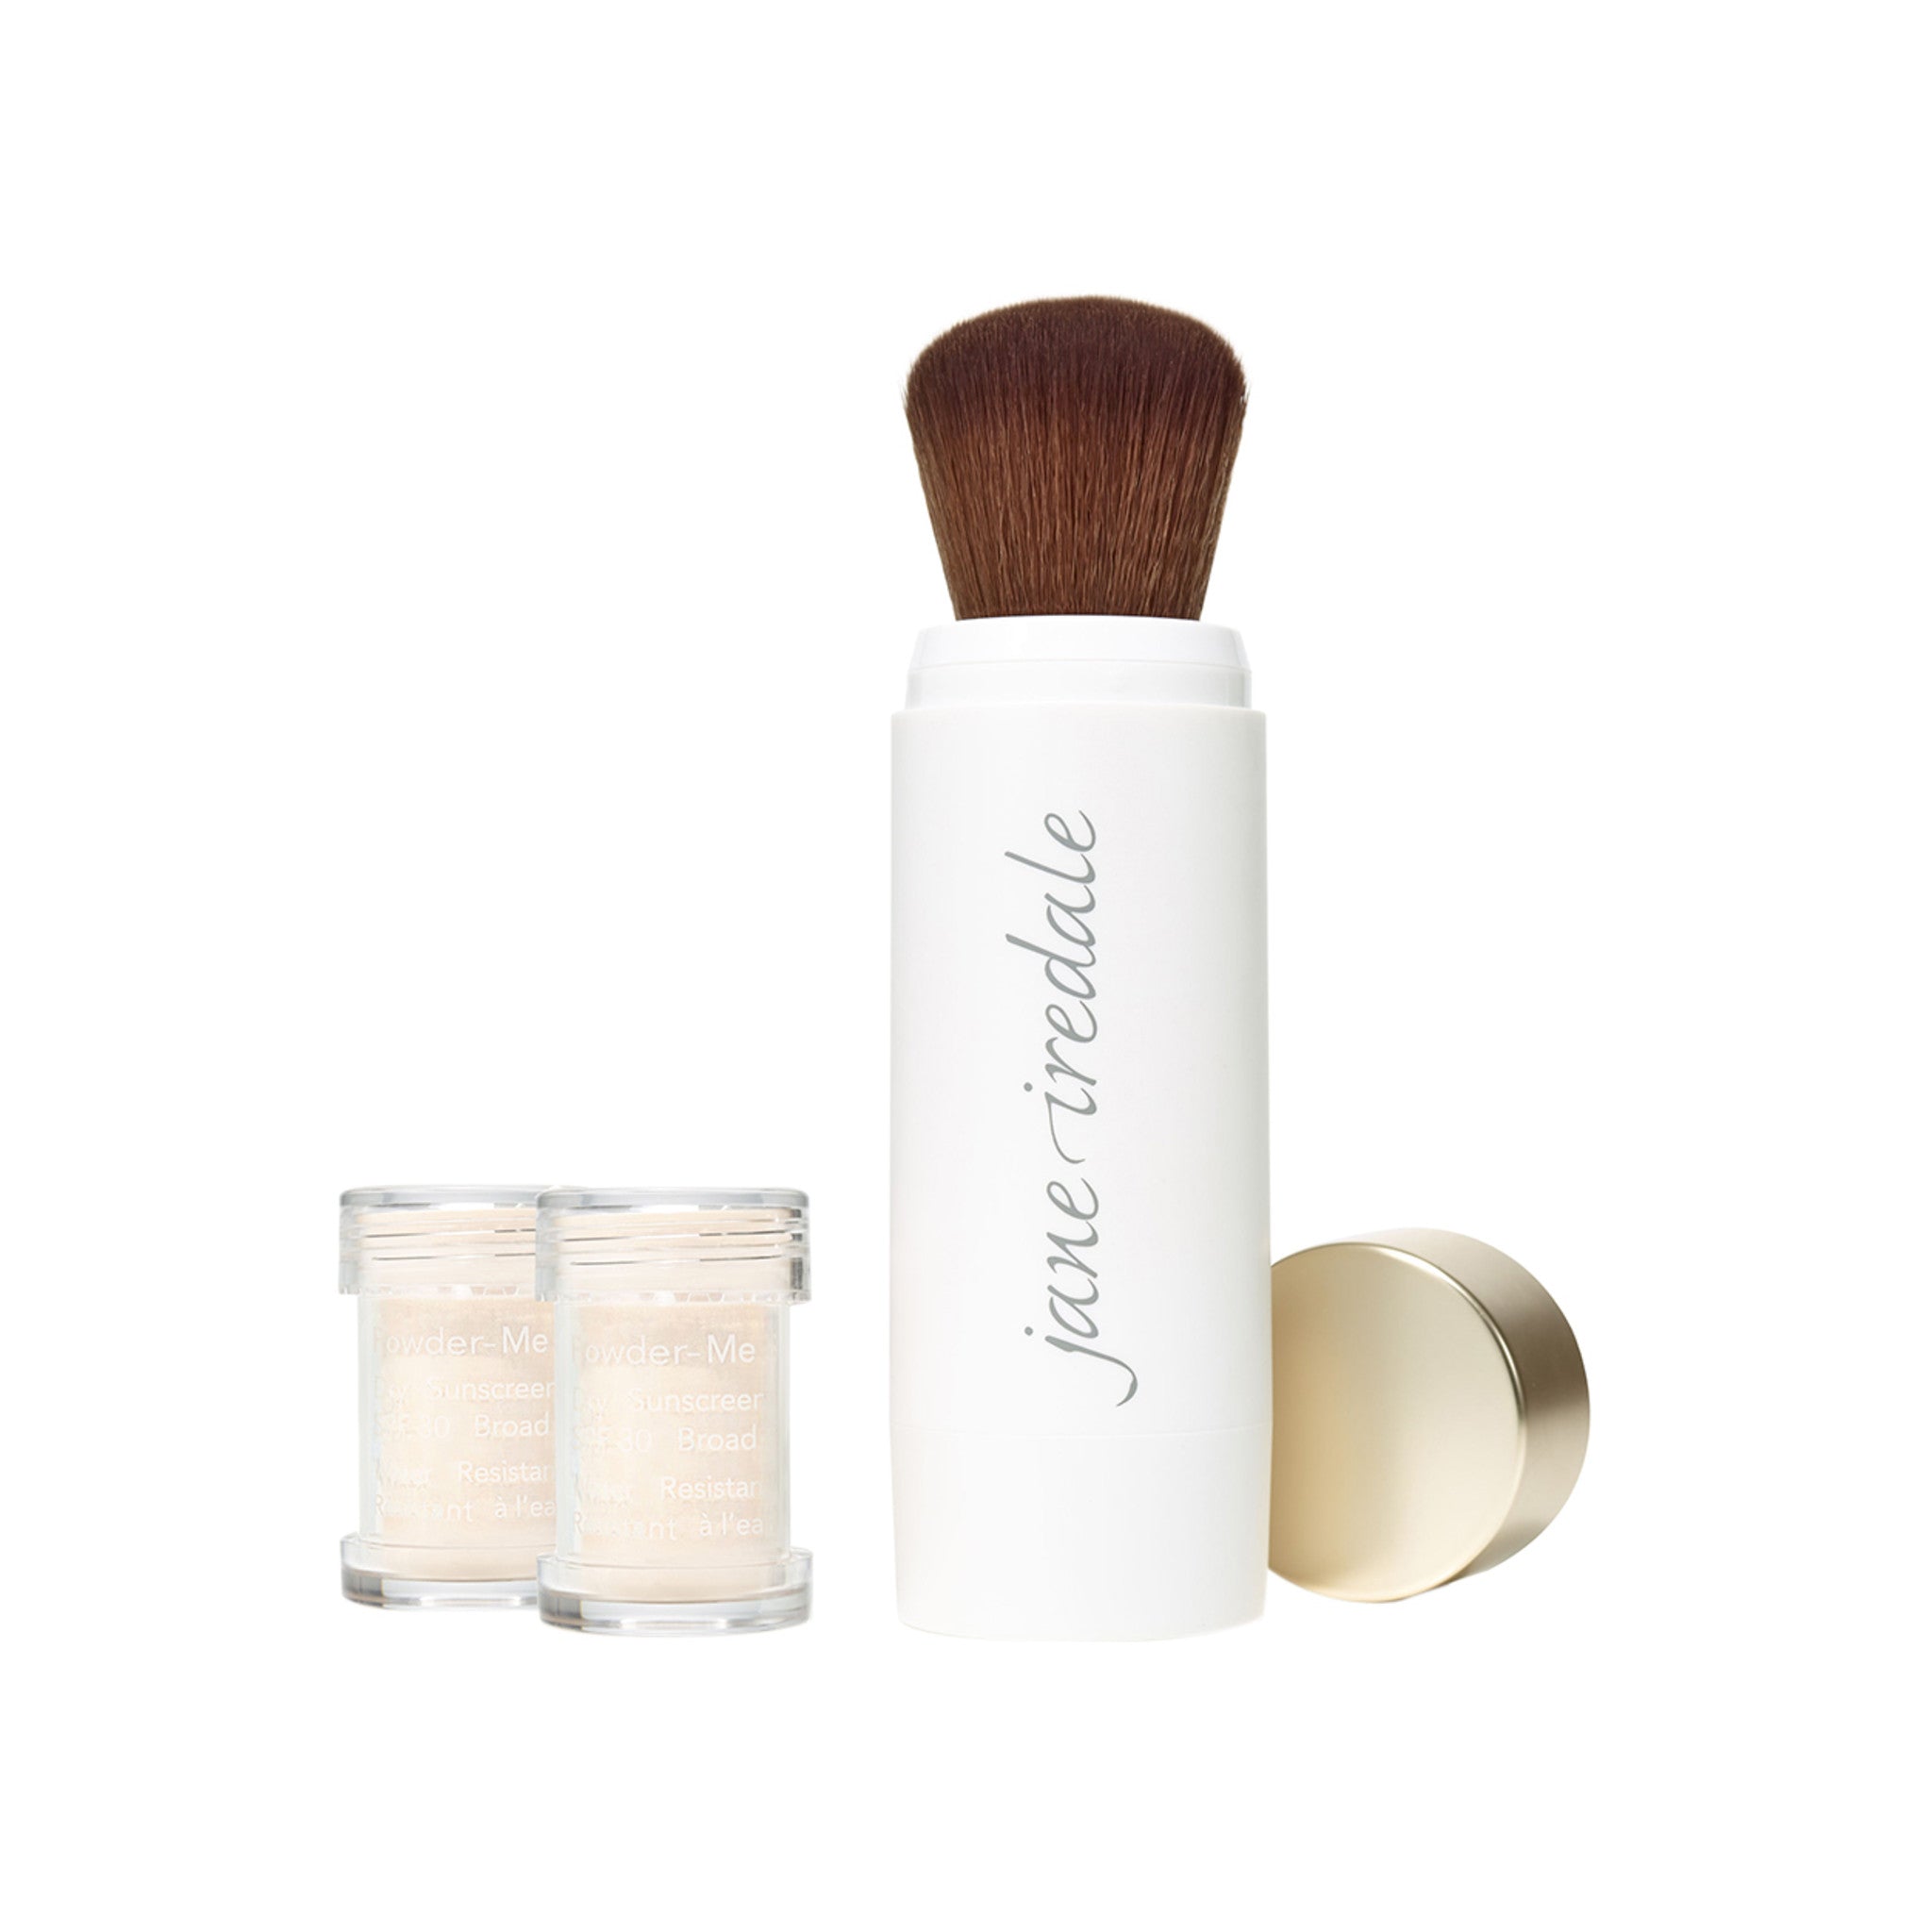 Jane Iredale Powder-Me Dry Sunscreen SPF 30 Color/Shade variant: Transparent main image.